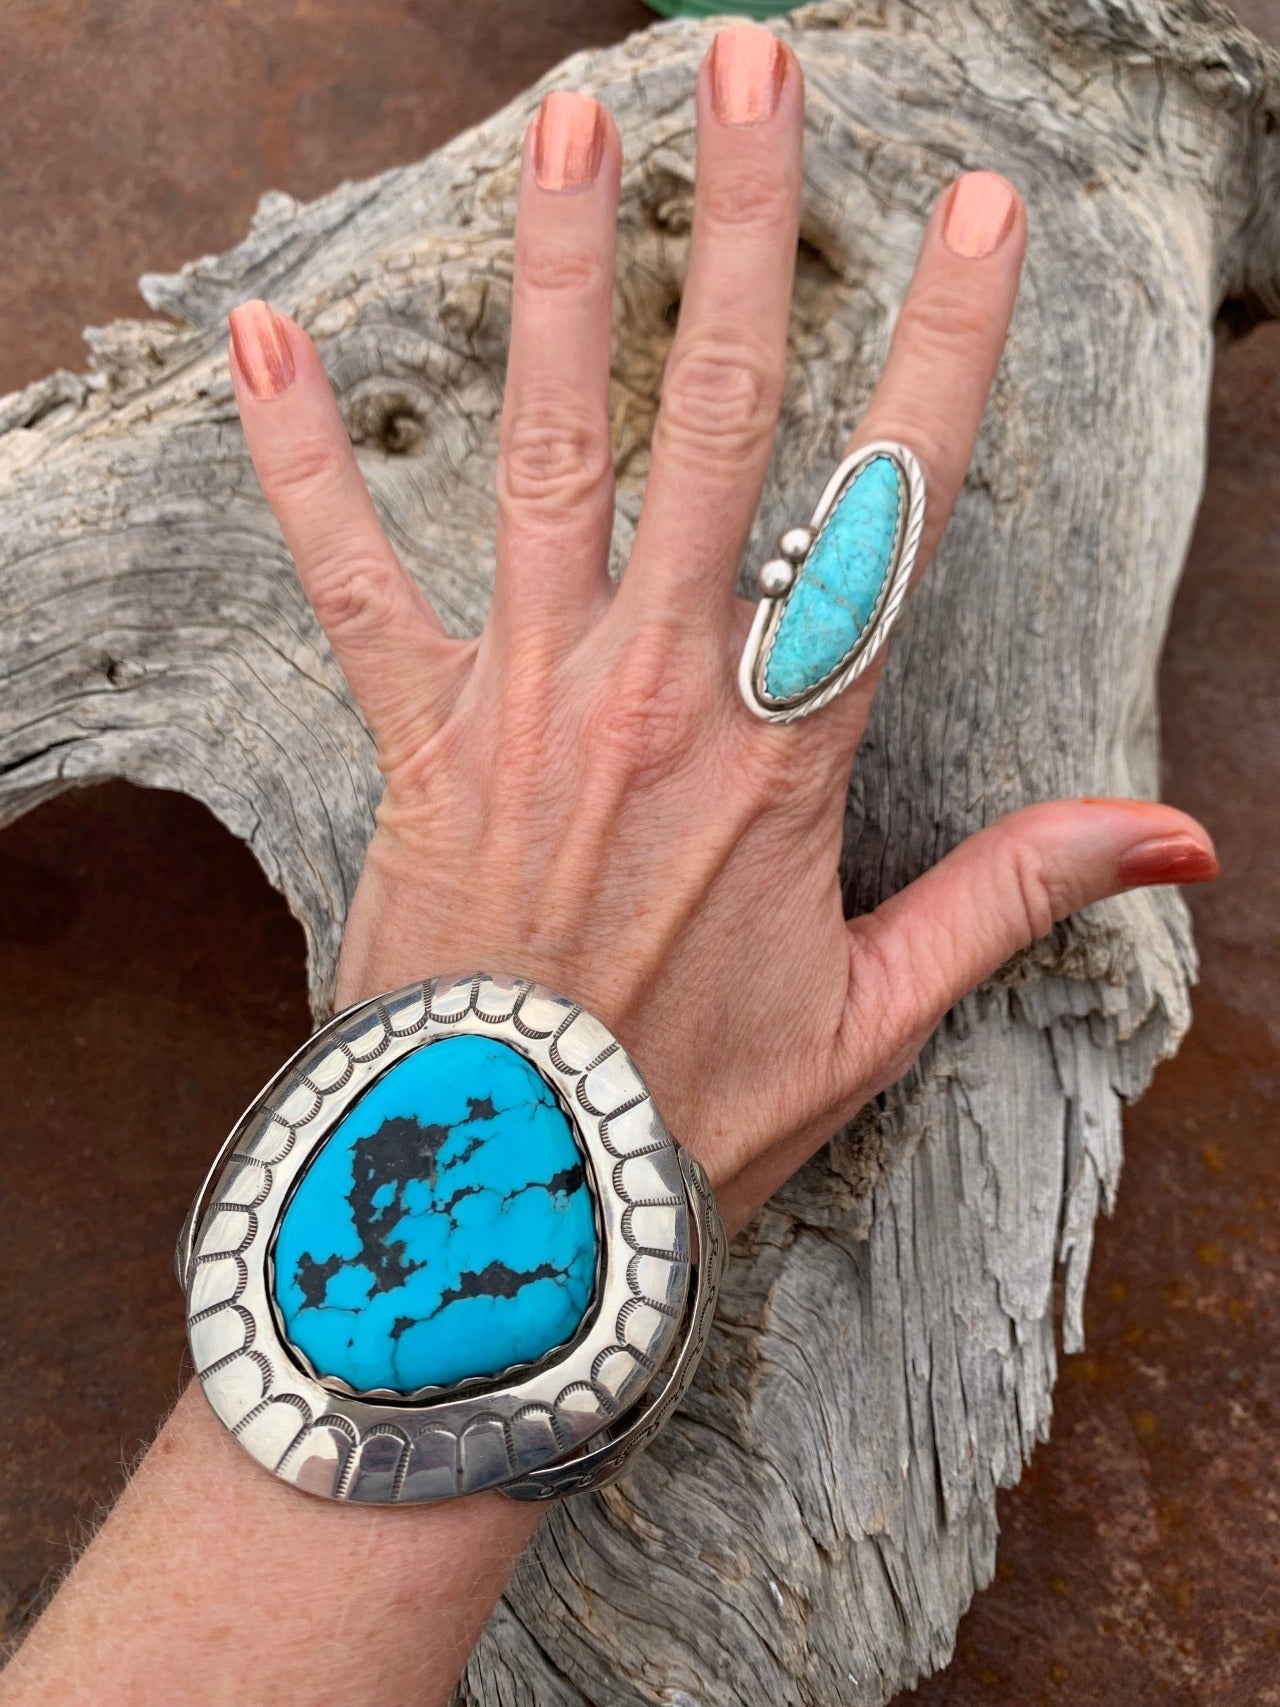 Blue Turquoise Silver Ladies Ring Southwest Style – White Bison Native Art